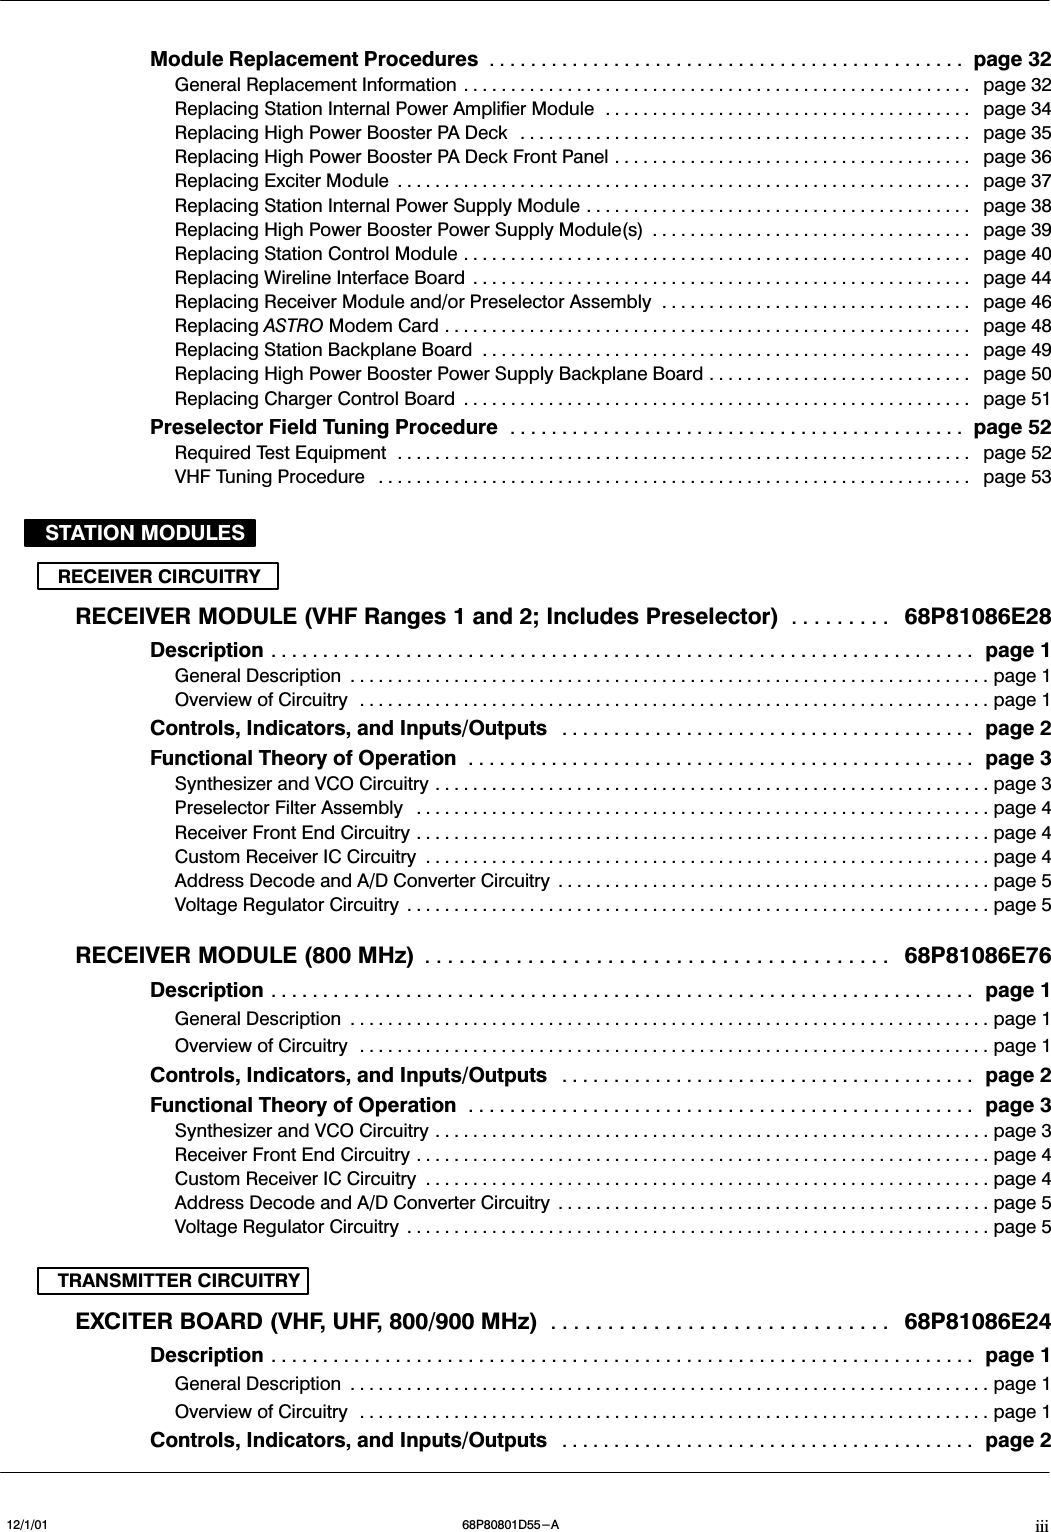 iii12/1/01 68P80801D55-AModule Replacement Procedures page 32..............................................General Replacement Information page 32......................................................Replacing Station Internal Power Amplifier Module page 34.......................................Replacing High Power Booster PA Deck page 35................................................Replacing High Power Booster PA Deck Front Panel page 36......................................Replacing Exciter Module page 37.............................................................Replacing Station Internal Power Supply Module page 38.........................................Replacing High Power Booster Power Supply Module(s) page 39..................................Replacing Station Control Module page 40......................................................Replacing Wireline Interface Board page 44.....................................................Replacing Receiver Module and/or Preselector Assembly page 46.................................Replacing ASTRO Modem Card page 48........................................................Replacing Station Backplane Board page 49....................................................Replacing High Power Booster Power Supply Backplane Board page 50............................Replacing Charger Control Board page 51......................................................Preselector Field Tuning Procedure page 52............................................Required Test Equipment page 52.............................................................VHF Tuning Procedure page 53...............................................................STATION MODULESRECEIVER CIRCUITRYRECEIVER MODULE (VHF Ranges 1 and 2; Includes Preselector) 68P81086E28.........Description page 1....................................................................General Description page 1....................................................................Overview of Circuitry page 1...................................................................Controls, Indicators, and Inputs/Outputs page 2........................................Functional Theory of Operation page 3.................................................Synthesizer and VCO Circuitry page 3...........................................................Preselector Filter Assembly page 4.............................................................Receiver Front End Circuitry page 4.............................................................Custom Receiver IC Circuitry page 4............................................................Address Decode and A/D Converter Circuitry page 5..............................................Voltage Regulator Circuitry page 5..............................................................RECEIVER MODULE (800 MHz) 68P81086E76.........................................Description page 1....................................................................General Description page 1....................................................................Overview of Circuitry page 1...................................................................Controls, Indicators, and Inputs/Outputs page 2........................................Functional Theory of Operation page 3.................................................Synthesizer and VCO Circuitry page 3...........................................................Receiver Front End Circuitry page 4.............................................................Custom Receiver IC Circuitry page 4............................................................Address Decode and A/D Converter Circuitry page 5..............................................Voltage Regulator Circuitry page 5..............................................................TRANSMITTER CIRCUITRYEXCITER BOARD (VHF, UHF, 800/900 MHz) 68P81086E24..............................Description page 1....................................................................General Description page 1....................................................................Overview of Circuitry page 1...................................................................Controls, Indicators, and Inputs/Outputs page 2........................................